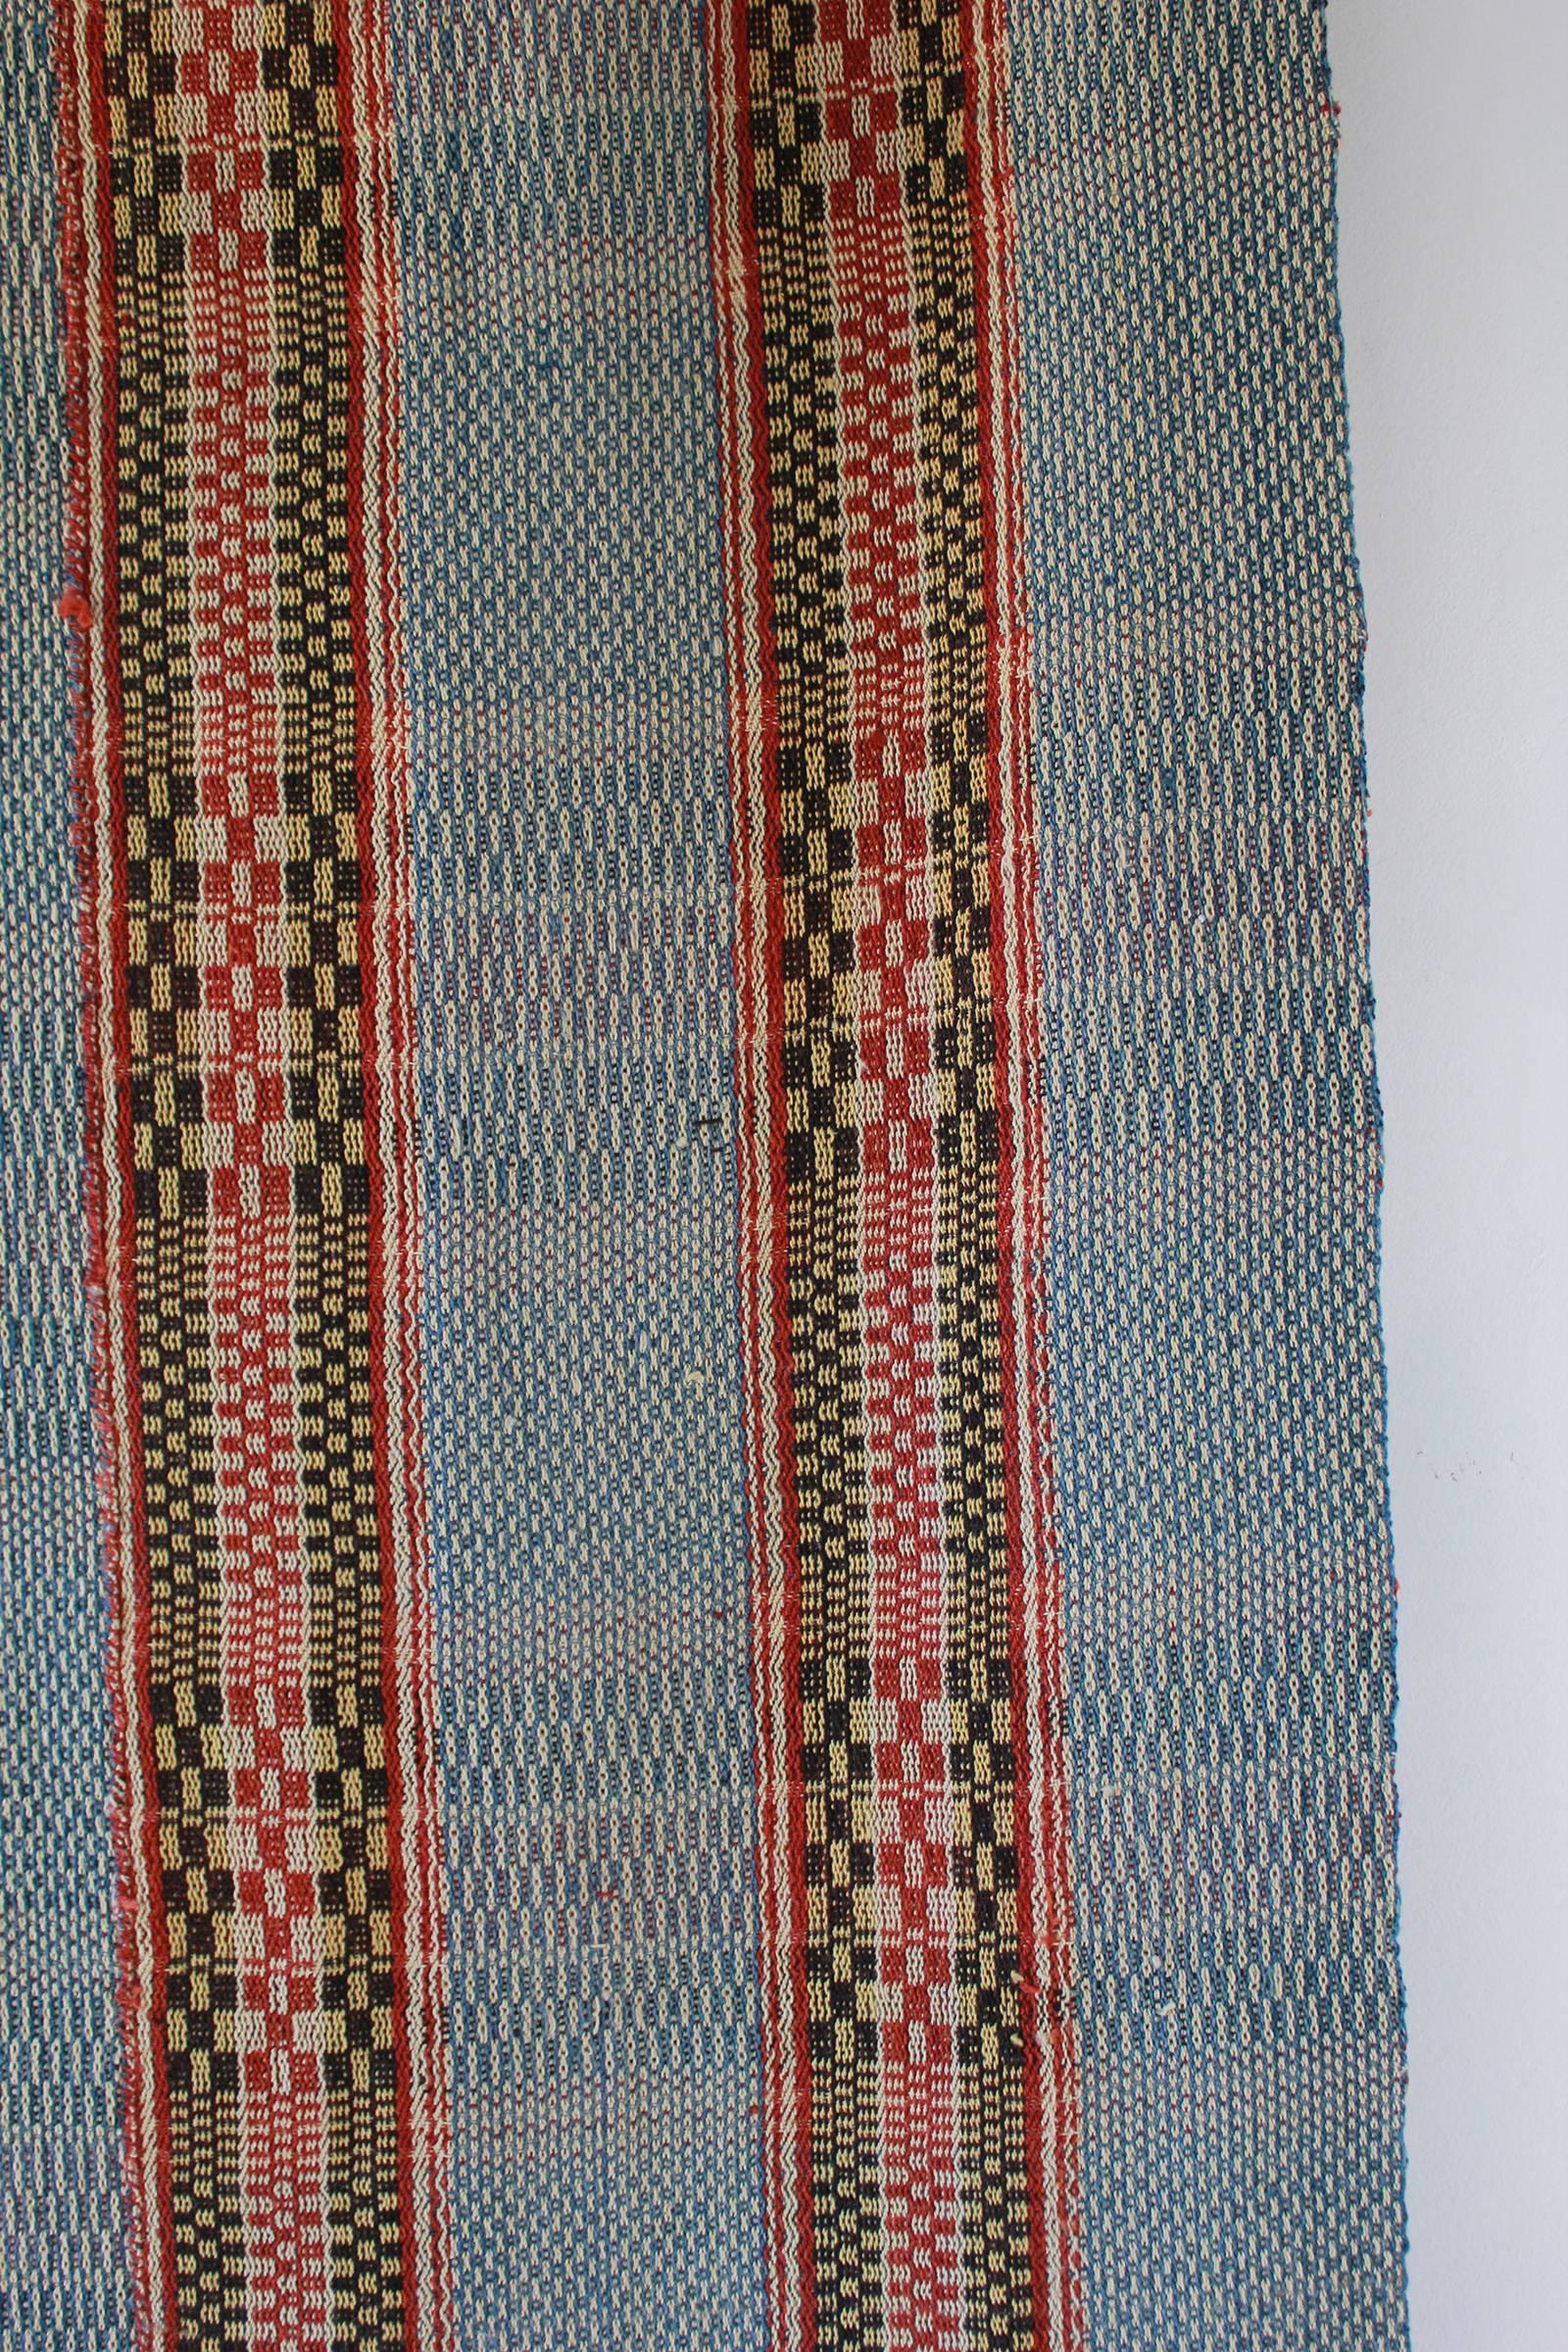 Multicolored Chinese Woven Rug 1